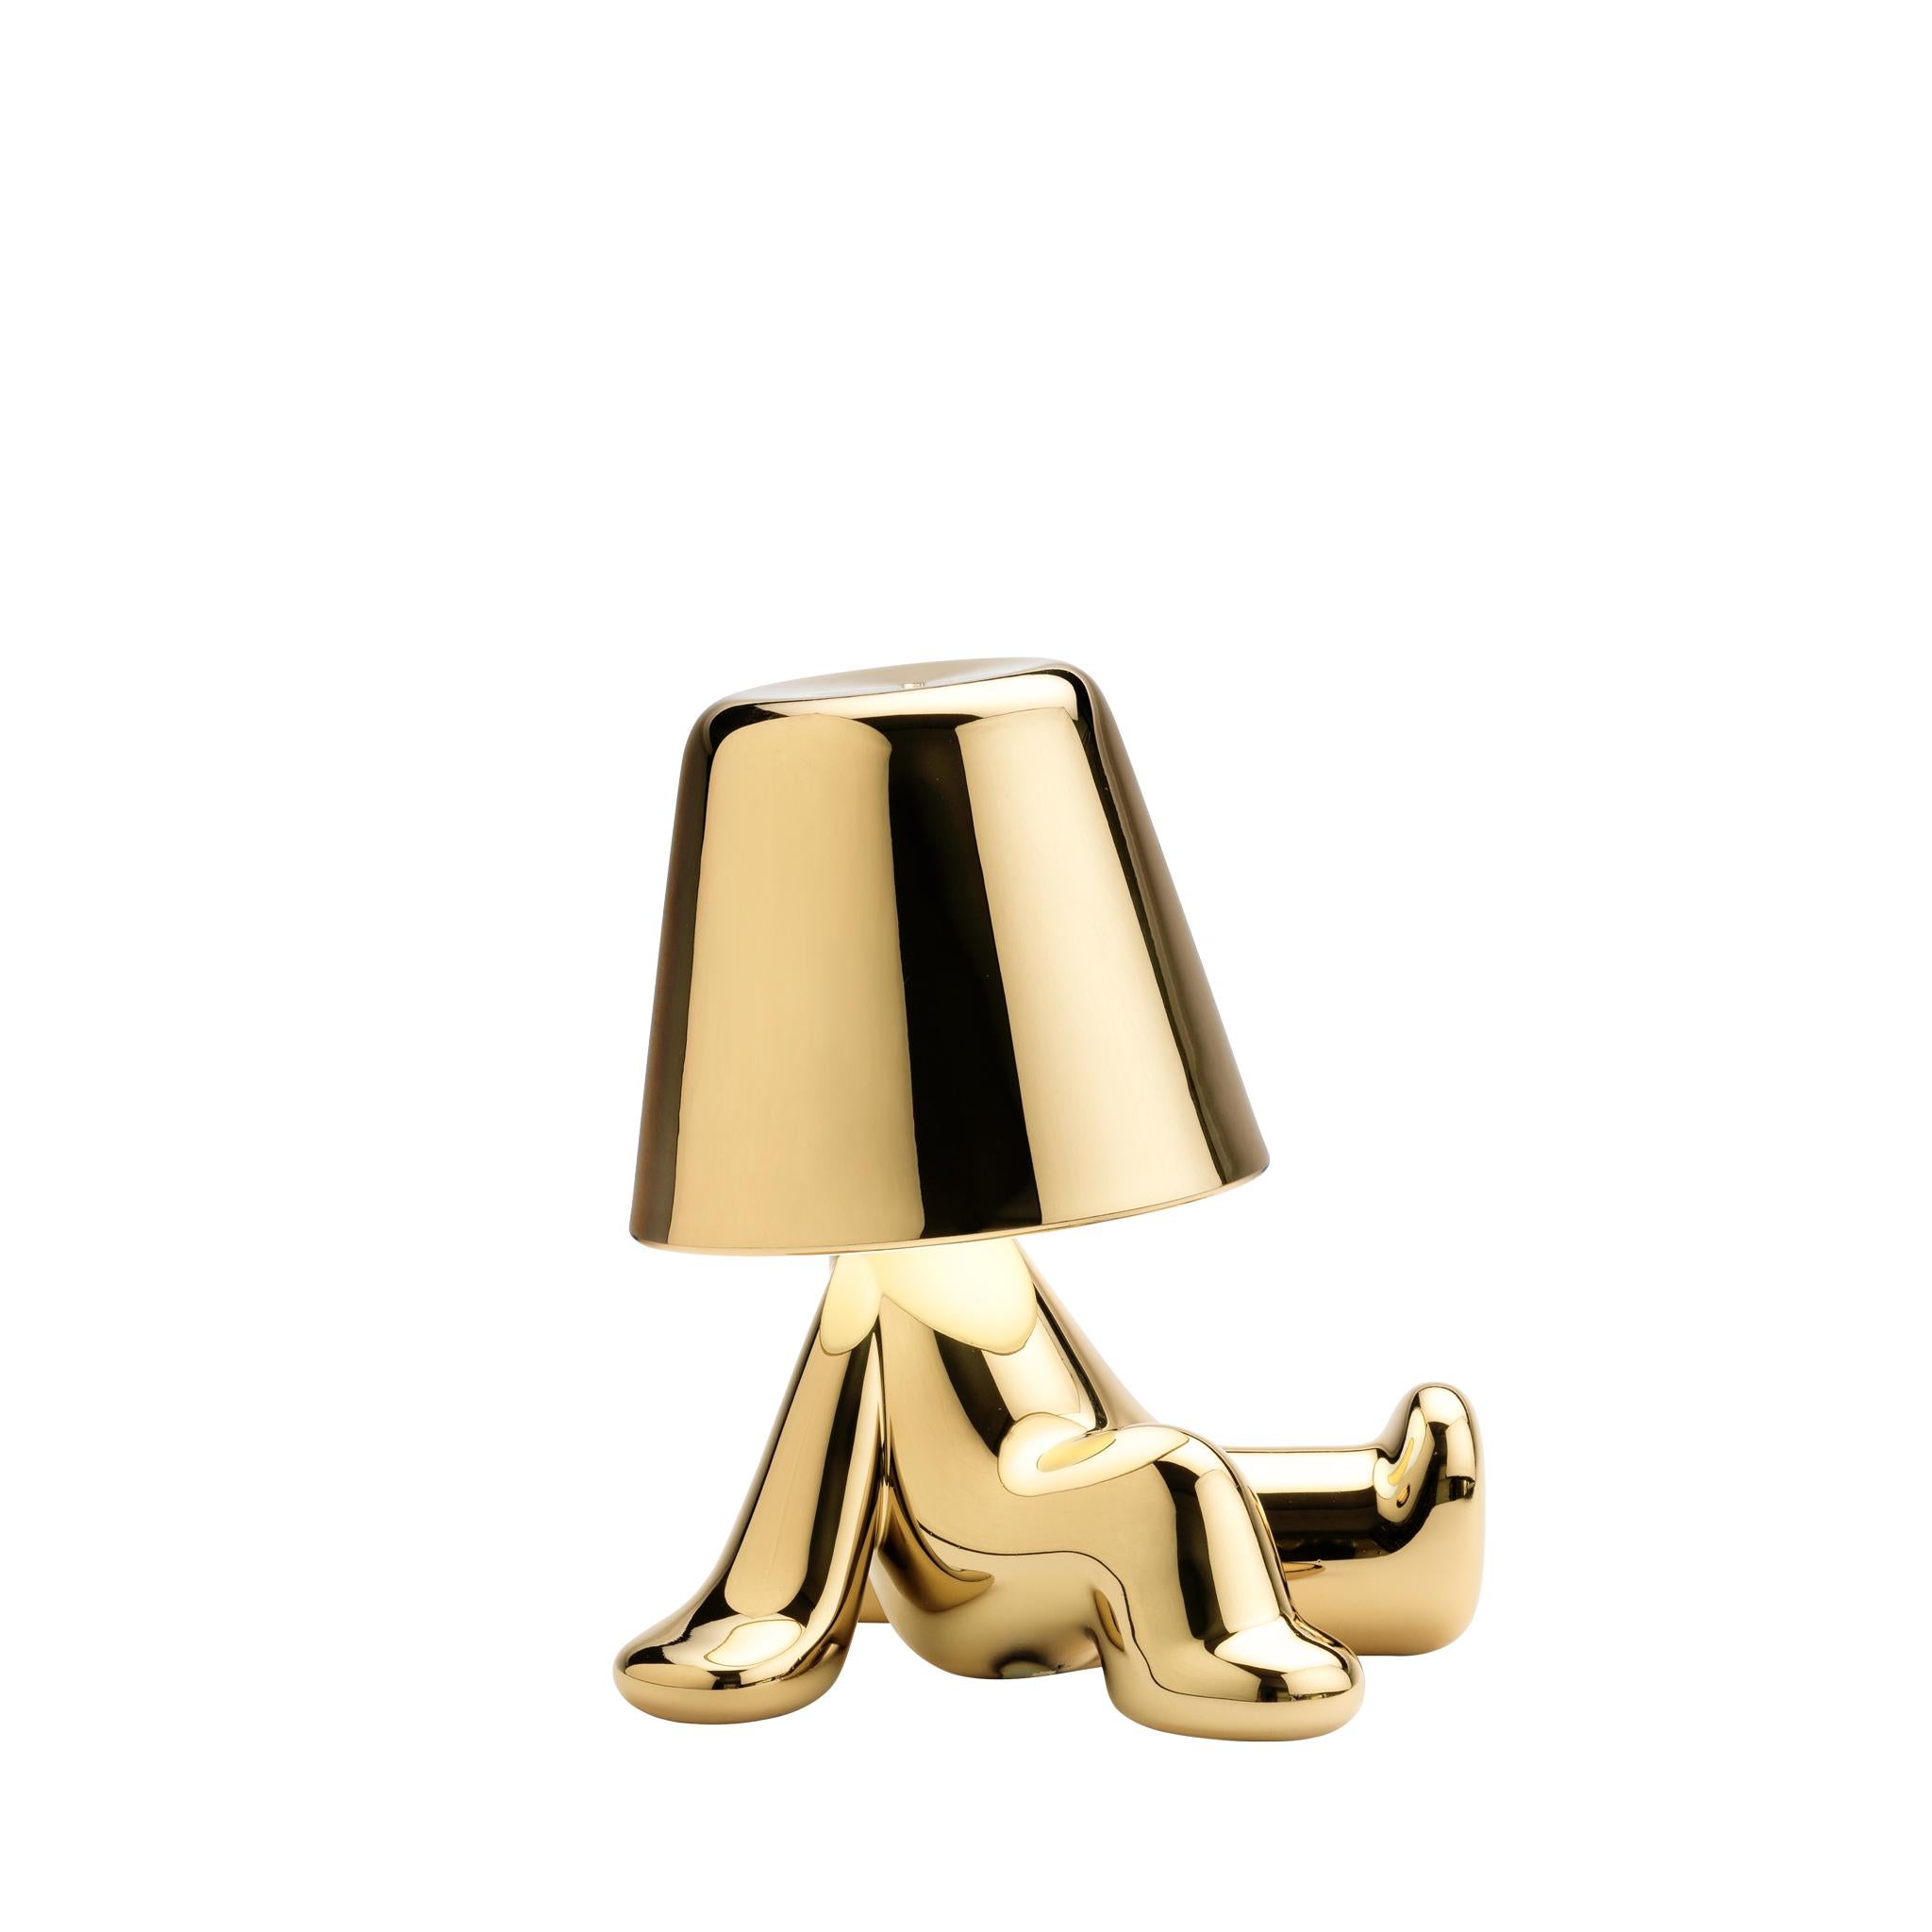 This Golden Brothers is called Bob.

Designed by Stefano Giovannoni, Golden Brothers is a family of lamp-characters which, reflecting a soft light on their body, enhance the plasticity and fluidity of the silhouette. The Golden Brothers, assuming